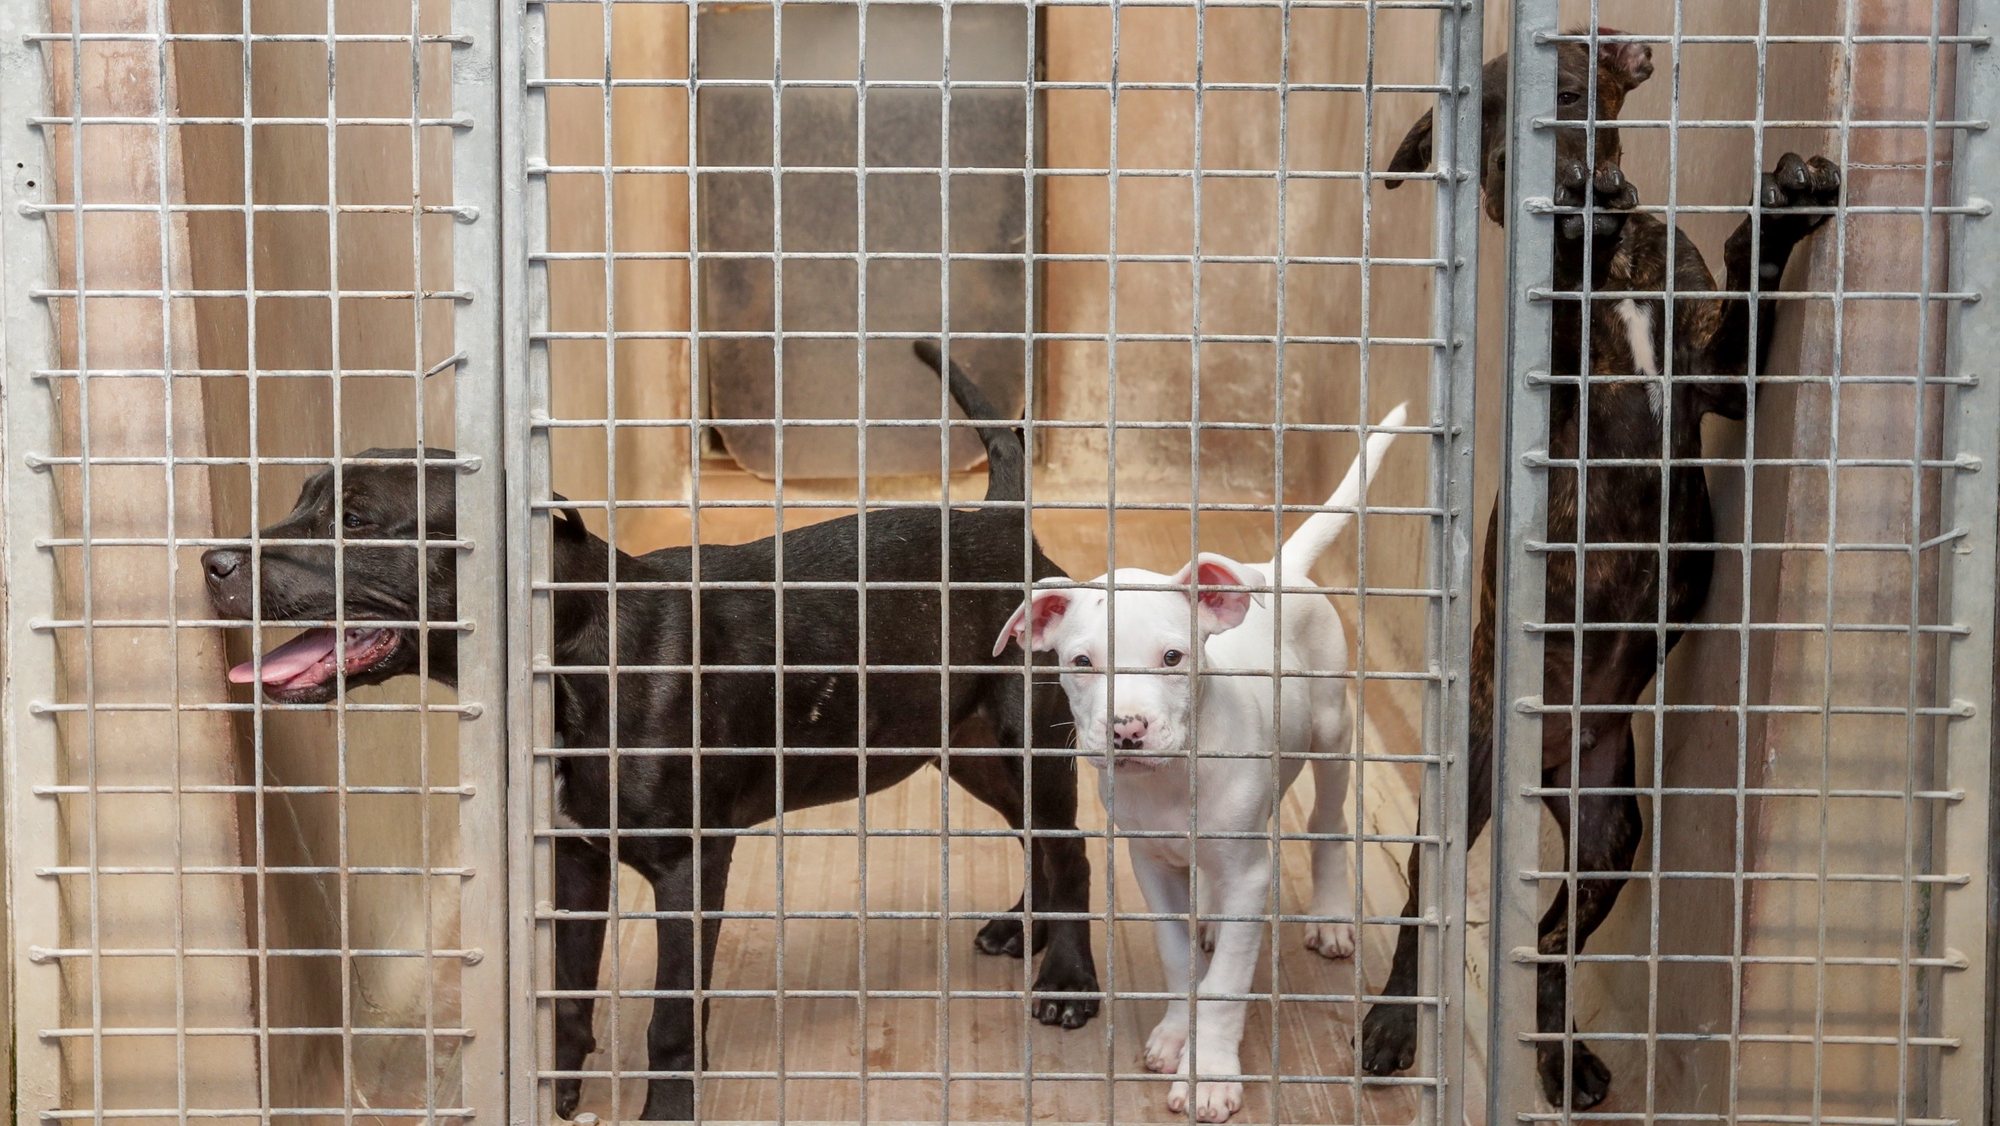 epa07747515 Abandoned dogs react inside their cage units at Veeweyde Animal Shelter, in Brussels, Belgium, 29 July 2019. The Royal Society for the Protection of Animals Veeweyde is the largest and oldest animal welfare company in Belgium. The dropout rate for cats is over 100 percent in summer compared to the winter season whereas for abandoned dogs is over 30 percent in summer in contrast to winter.  EPA/STEPHANIE LECOCQ  ATTENTION: This Image is part of a PHOTO SET